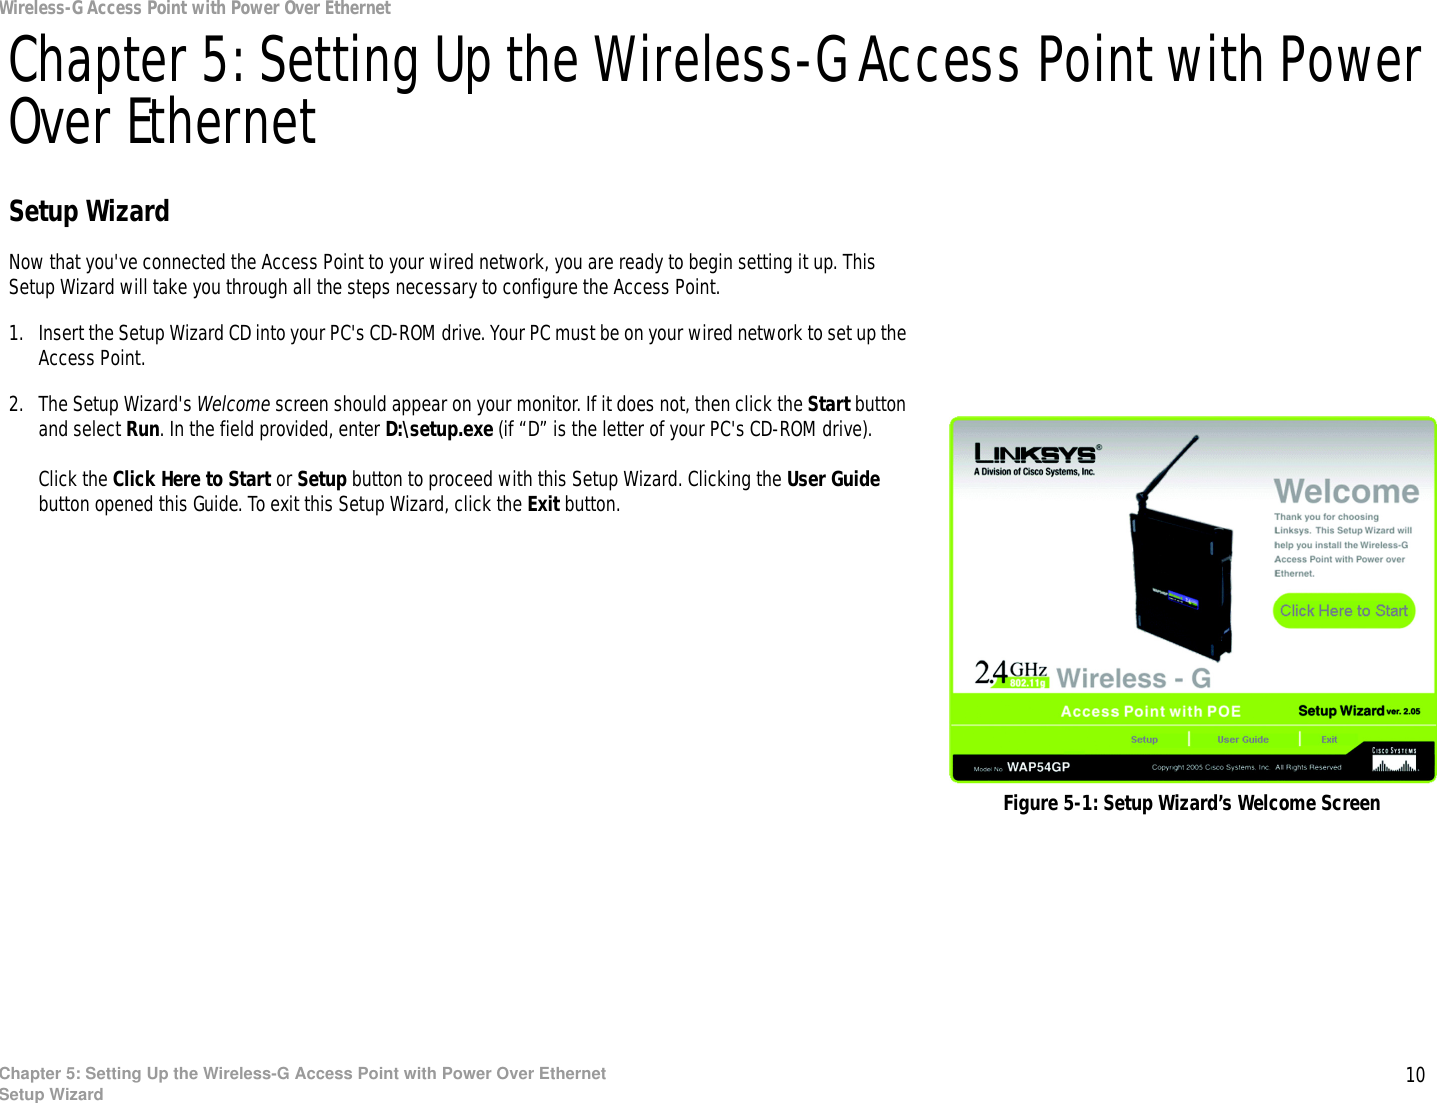 10Chapter 5: Setting Up the Wireless-G Access Point with Power Over EthernetSetup WizardWireless-G Access Point with Power Over EthernetChapter 5: Setting Up the Wireless-G Access Point with Power Over EthernetSetup WizardNow that you&apos;ve connected the Access Point to your wired network, you are ready to begin setting it up. This Setup Wizard will take you through all the steps necessary to configure the Access Point.1. Insert the Setup Wizard CD into your PC&apos;s CD-ROM drive. Your PC must be on your wired network to set up the Access Point.2. The Setup Wizard&apos;s Welcome screen should appear on your monitor. If it does not, then click the Start button and select Run. In the field provided, enter D:\setup.exe (if “D” is the letter of your PC&apos;s CD-ROM drive). Click the Click Here to Start or Setup button to proceed with this Setup Wizard. Clicking the User Guide button opened this Guide. To exit this Setup Wizard, click the Exit button.Figure 5-1: Setup Wizard’s Welcome Screen